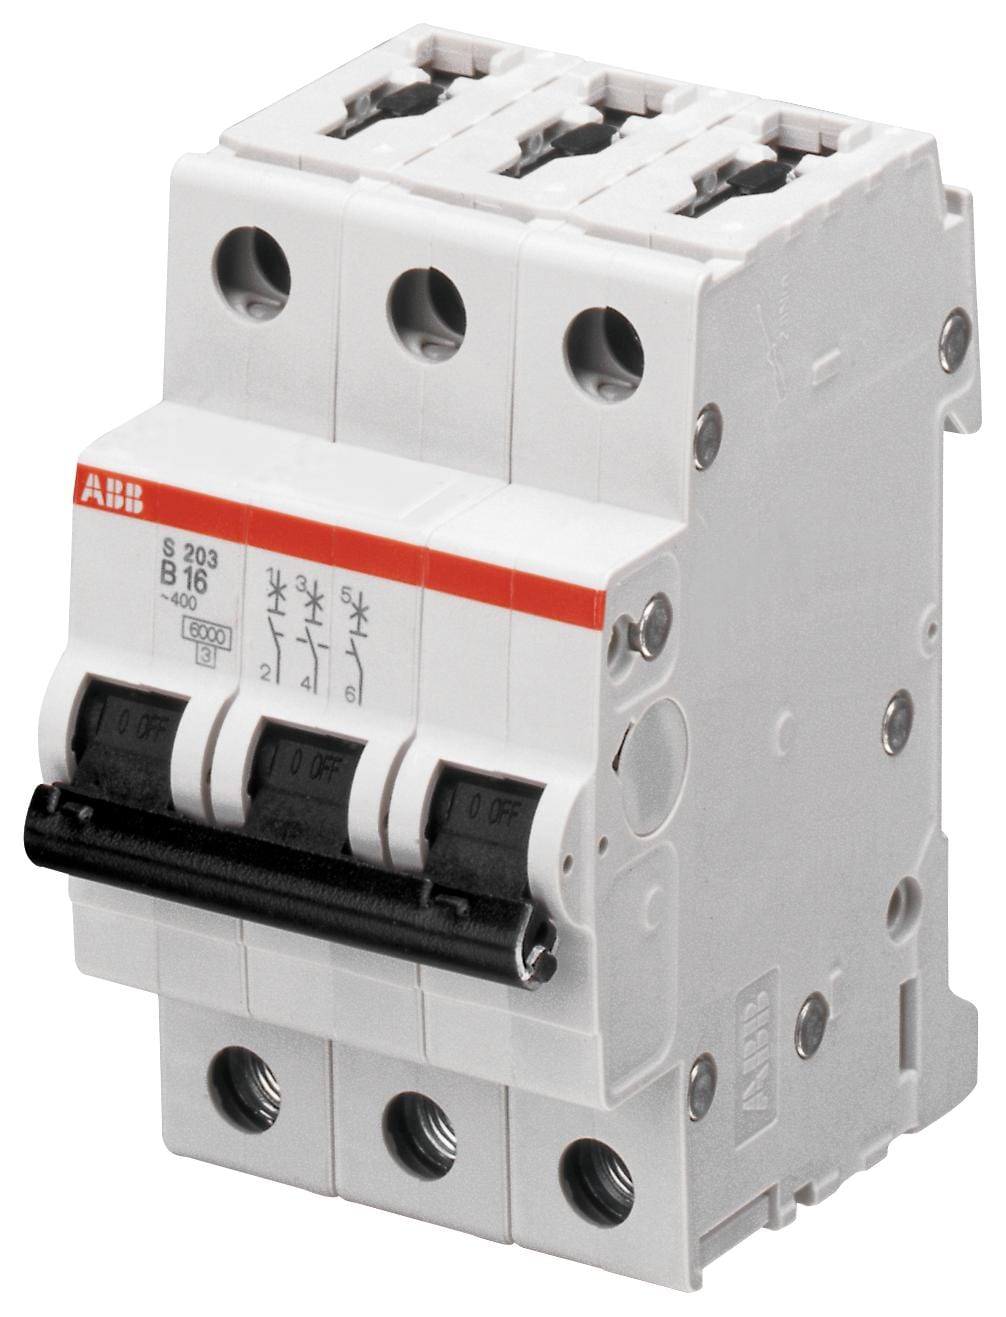 ABB Thermal Magnetic S203M-D50 CIRCUIT BREAKER, THERMAL MAG, 3 POLE ABB 2501410 S203M-D50